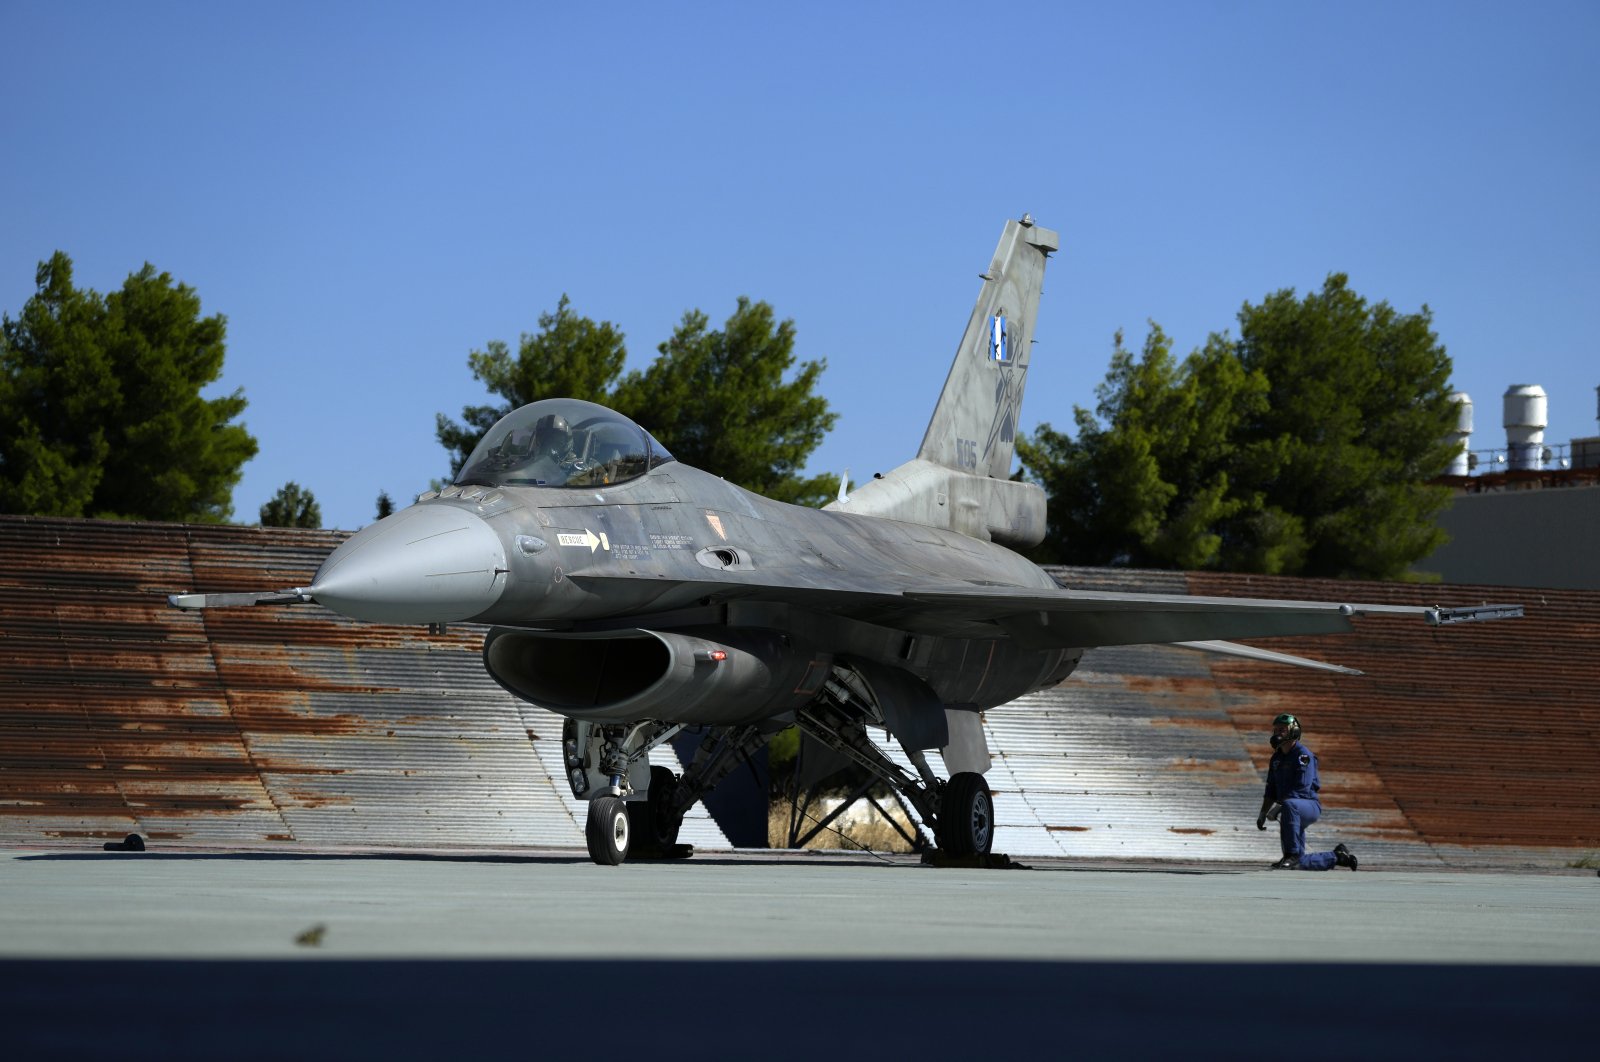 A Greek F-16 Viper fighter jet prepares for takeoff at Tanagra air force base north of Athens, Greece, Sept. 12, 2022. (AP Photo)